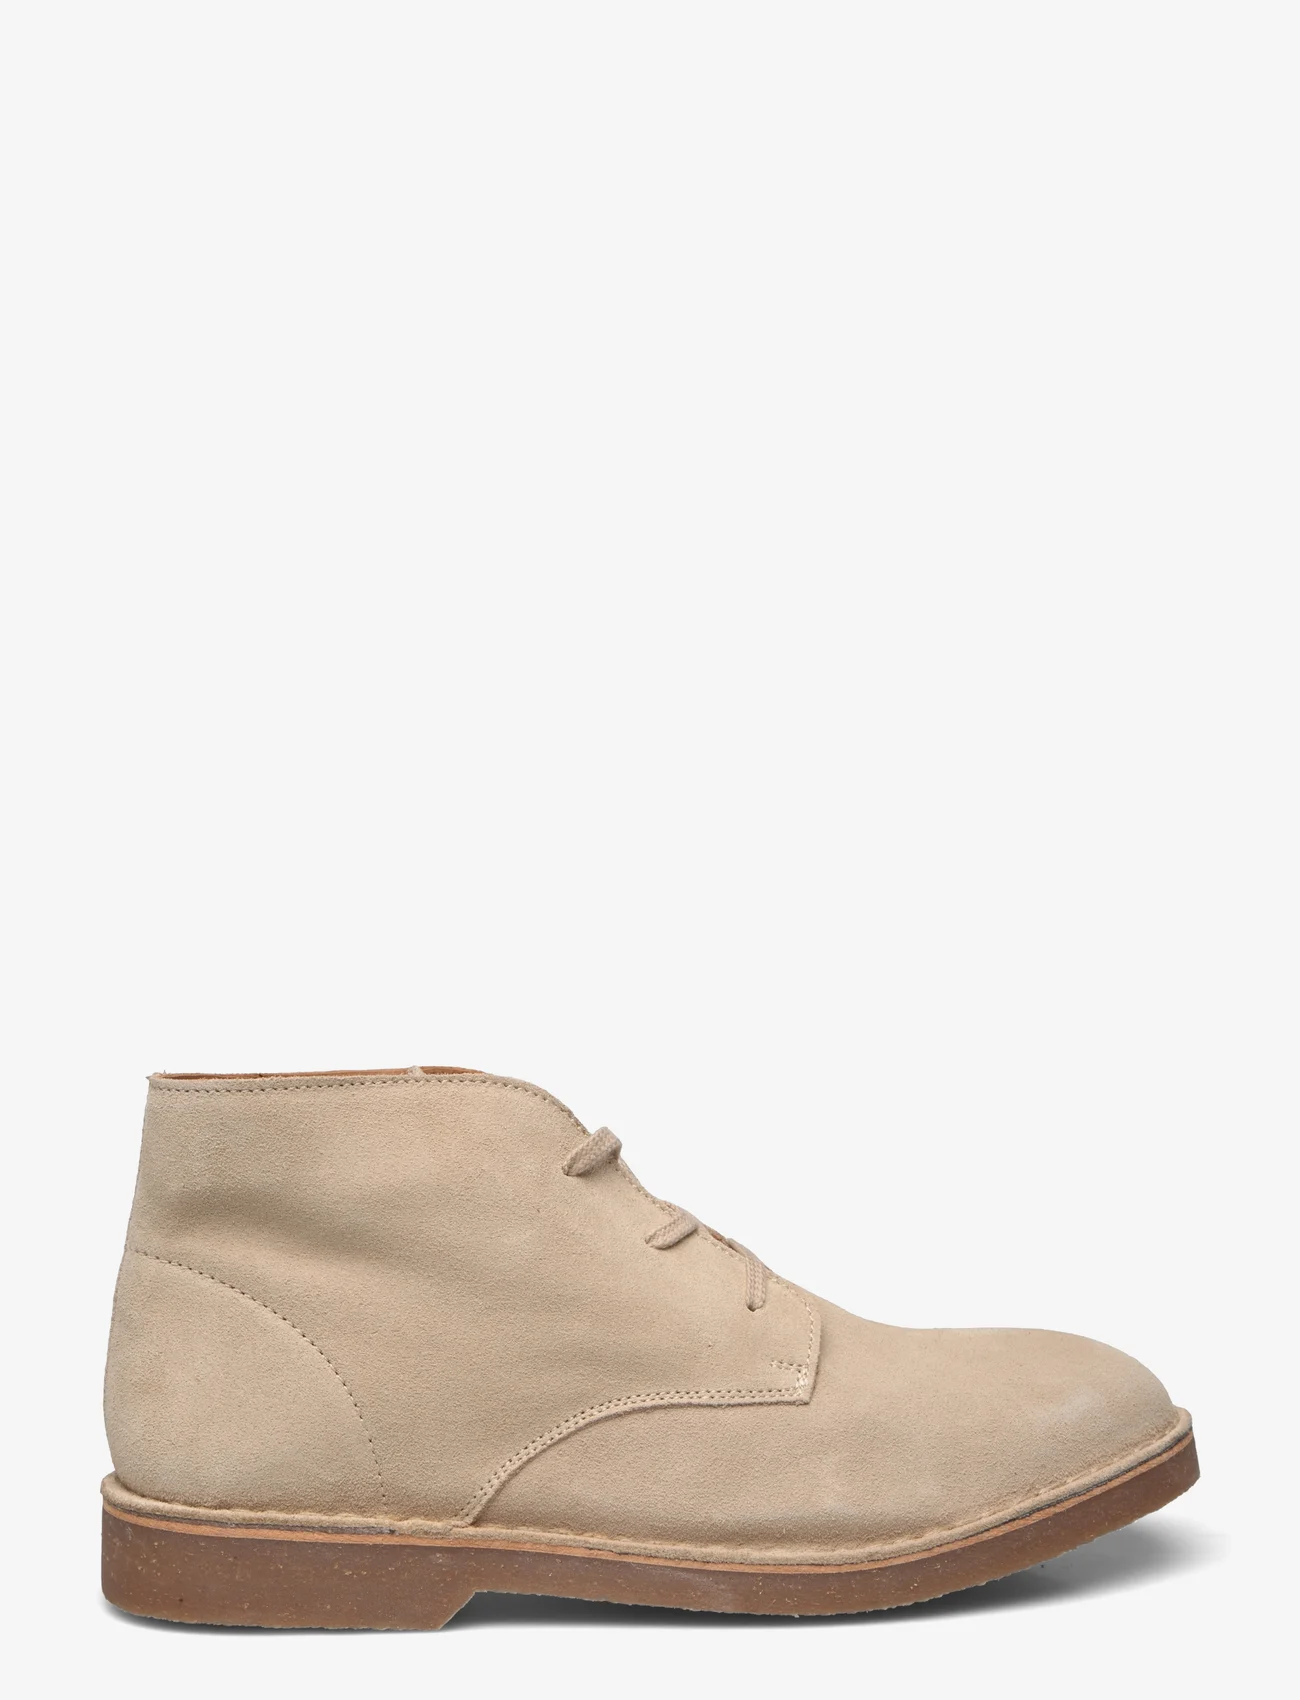 Selected Homme - SLHRIGA NEW SUEDE CHUKKA BOOT B - desert boots - oatmeal - 1